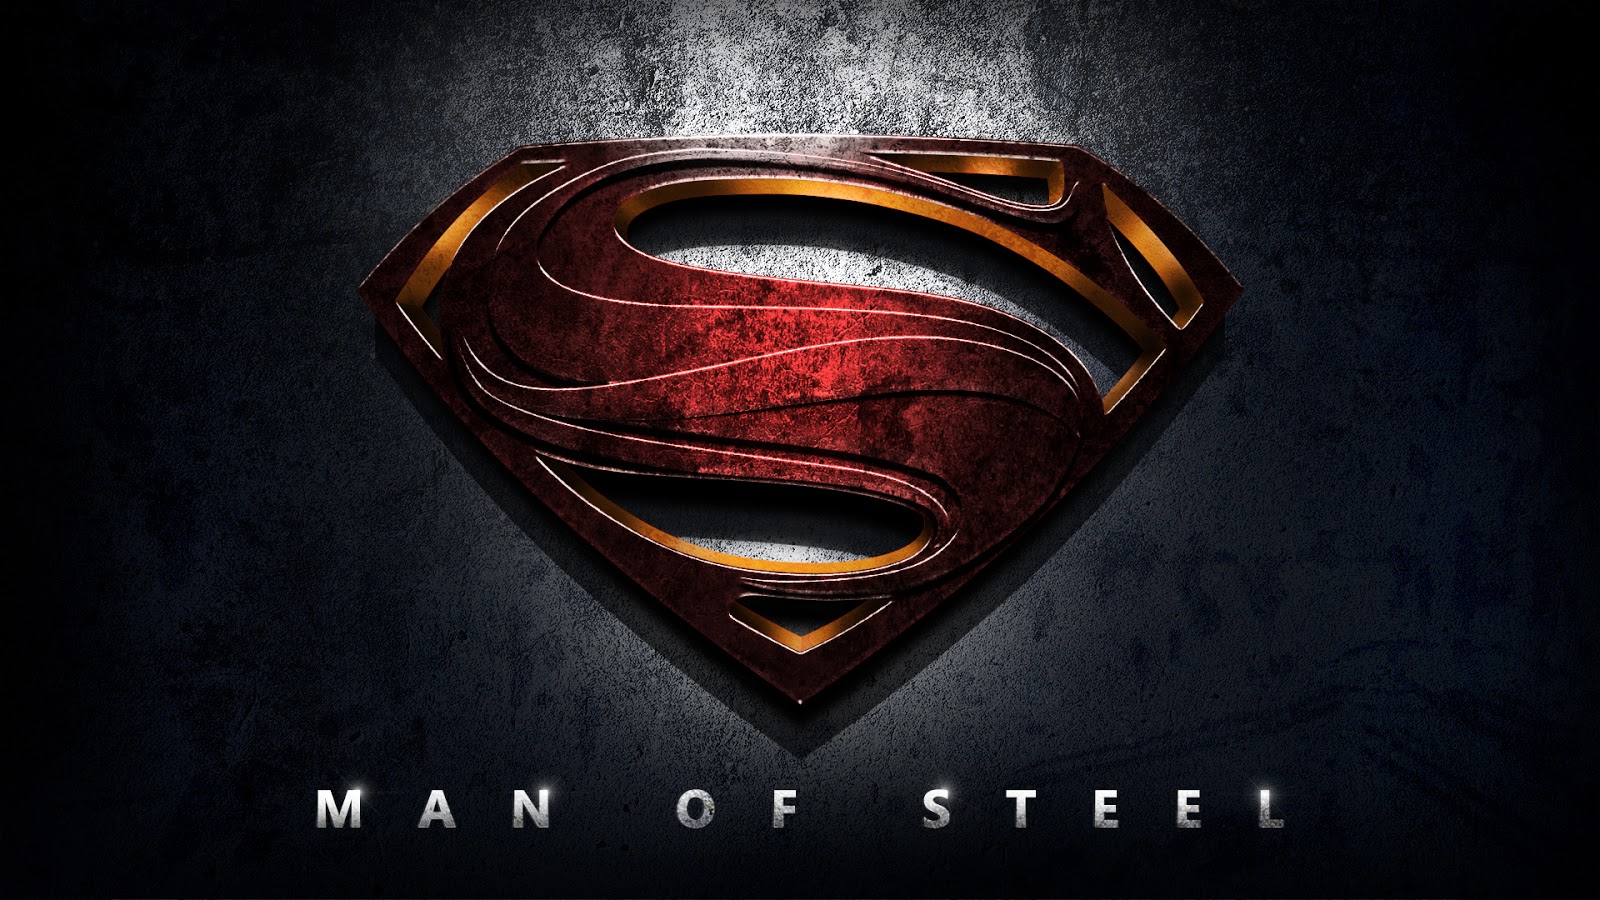 High Quality Images Super Man The Man of Steel Wallpaper